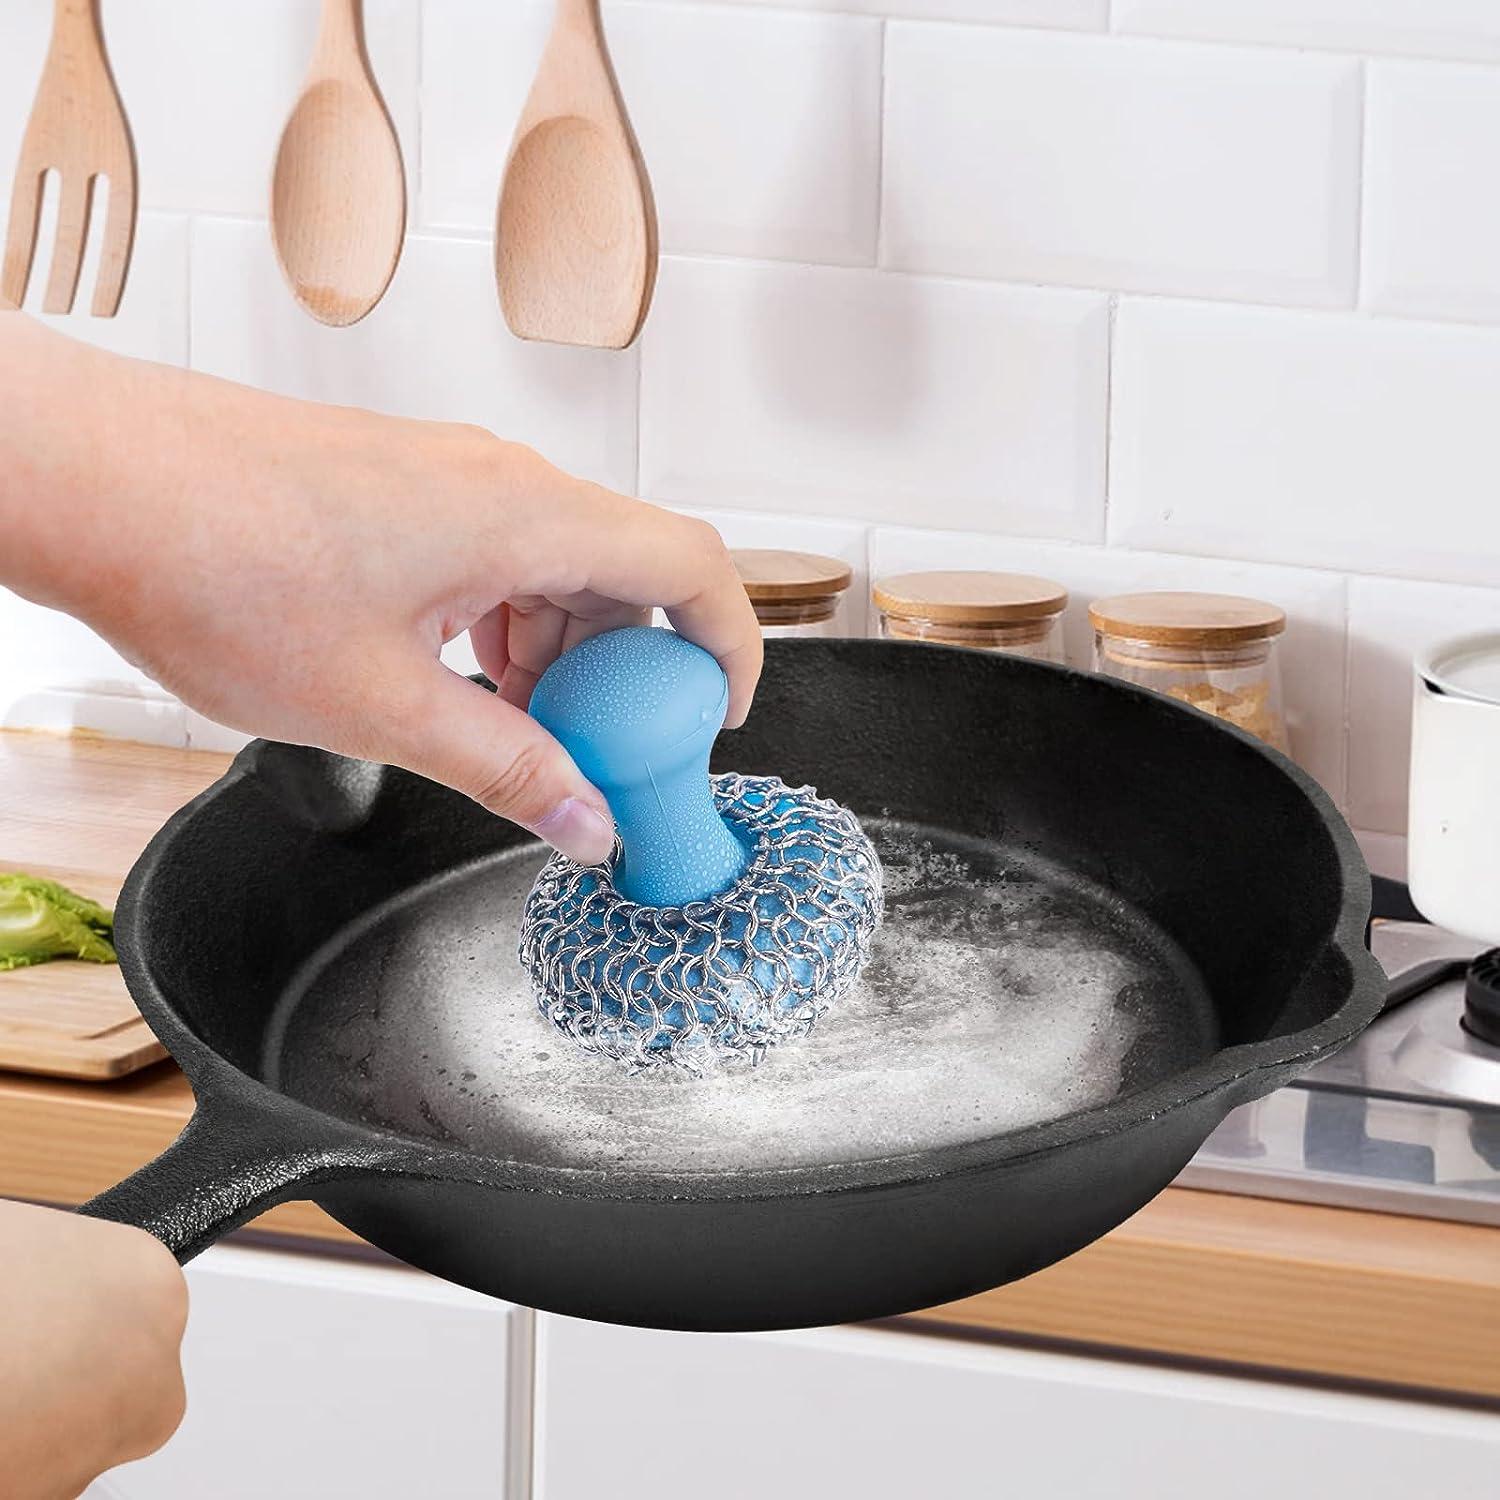 Cast Iron Scrubber + Pan Scraper, Upgraded Cast Iron Cleaner with